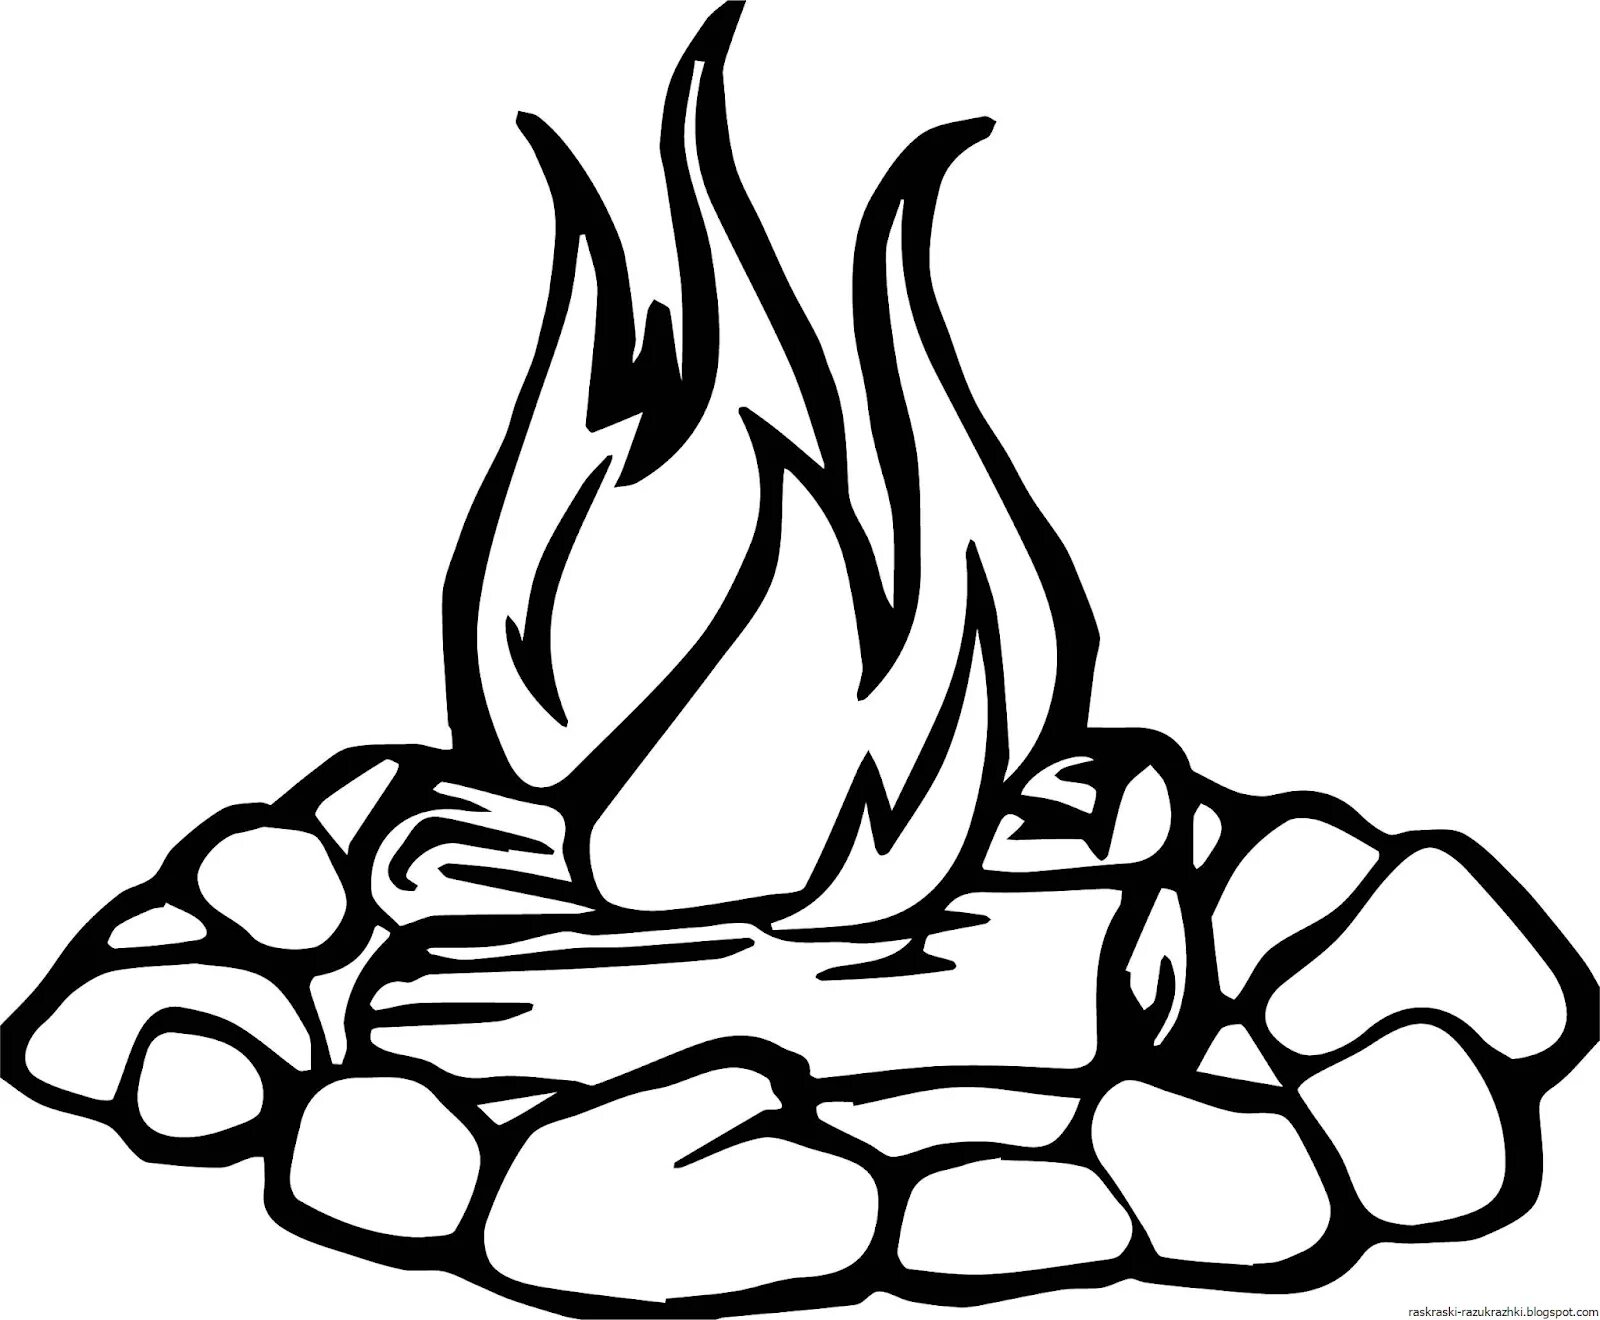 Blessed bonfire coloring book for kids